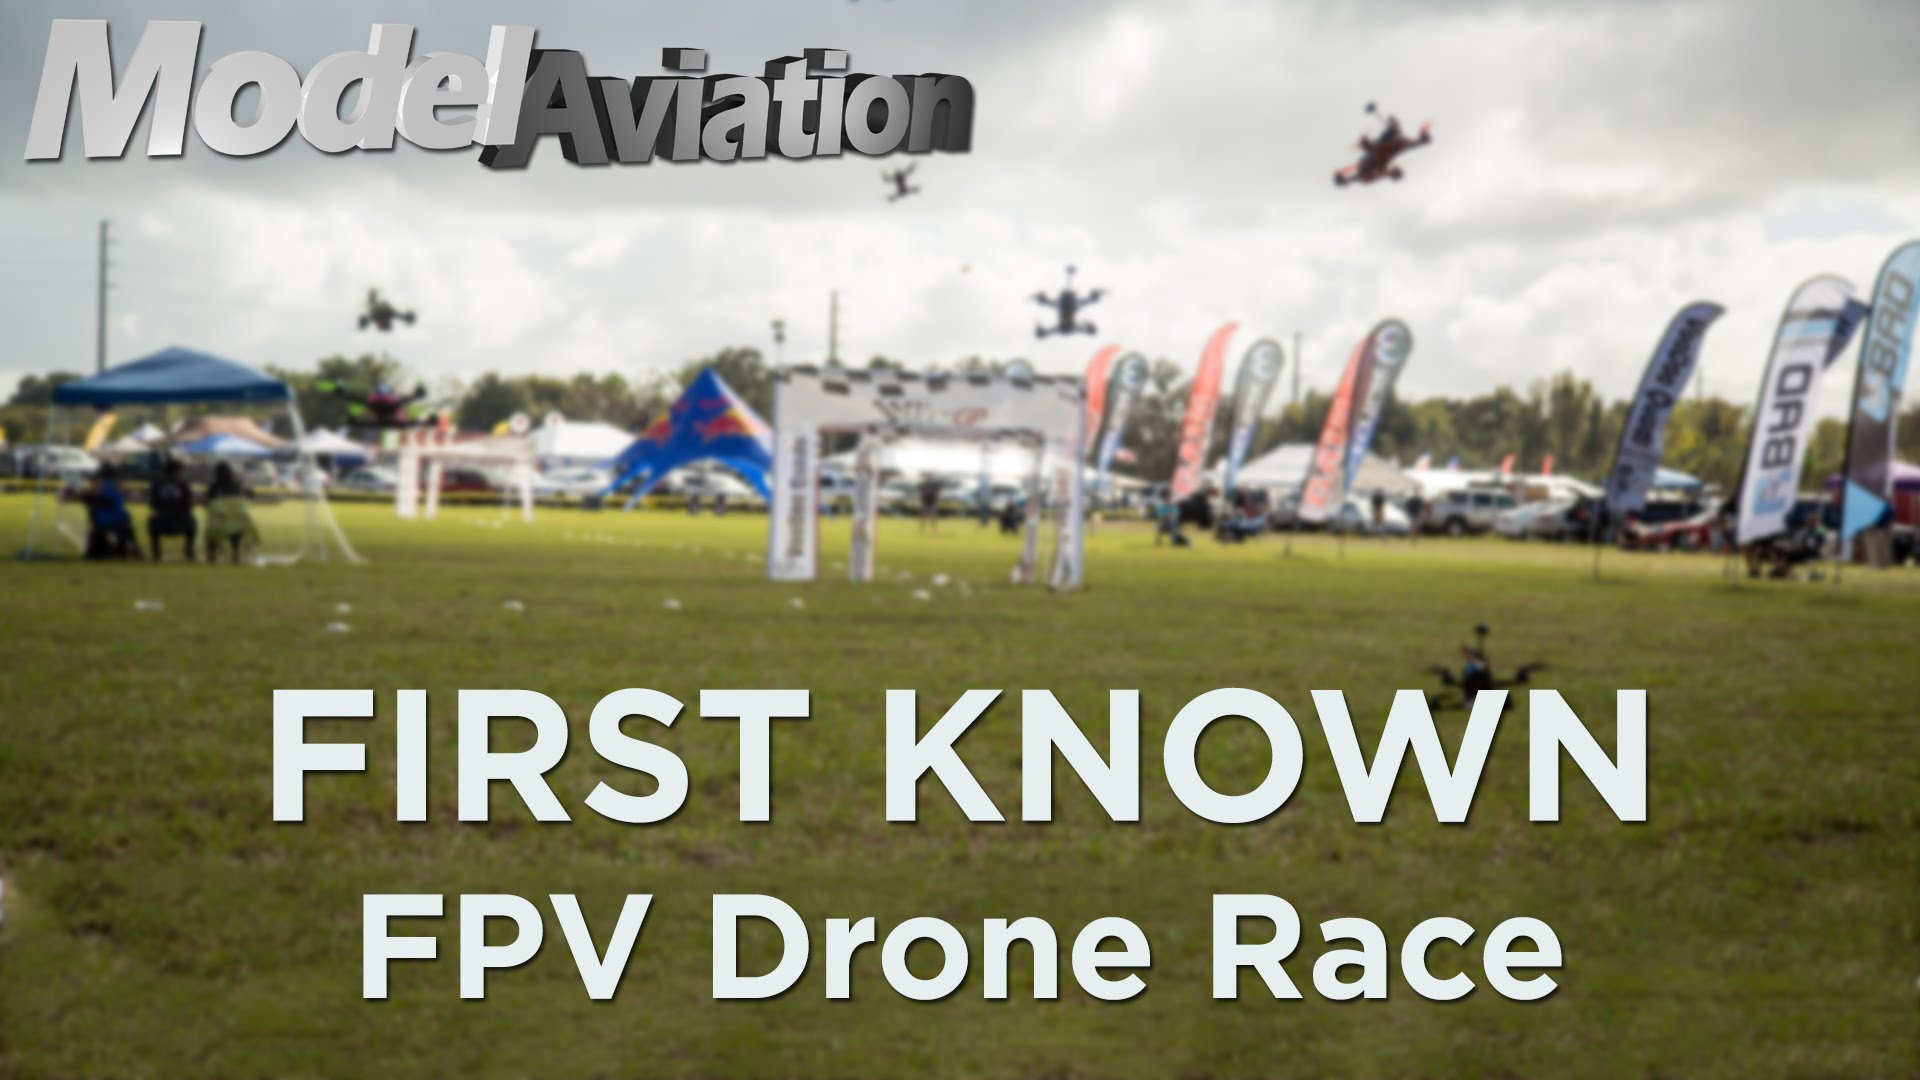 First known FPV Drone Race – Model Aviation